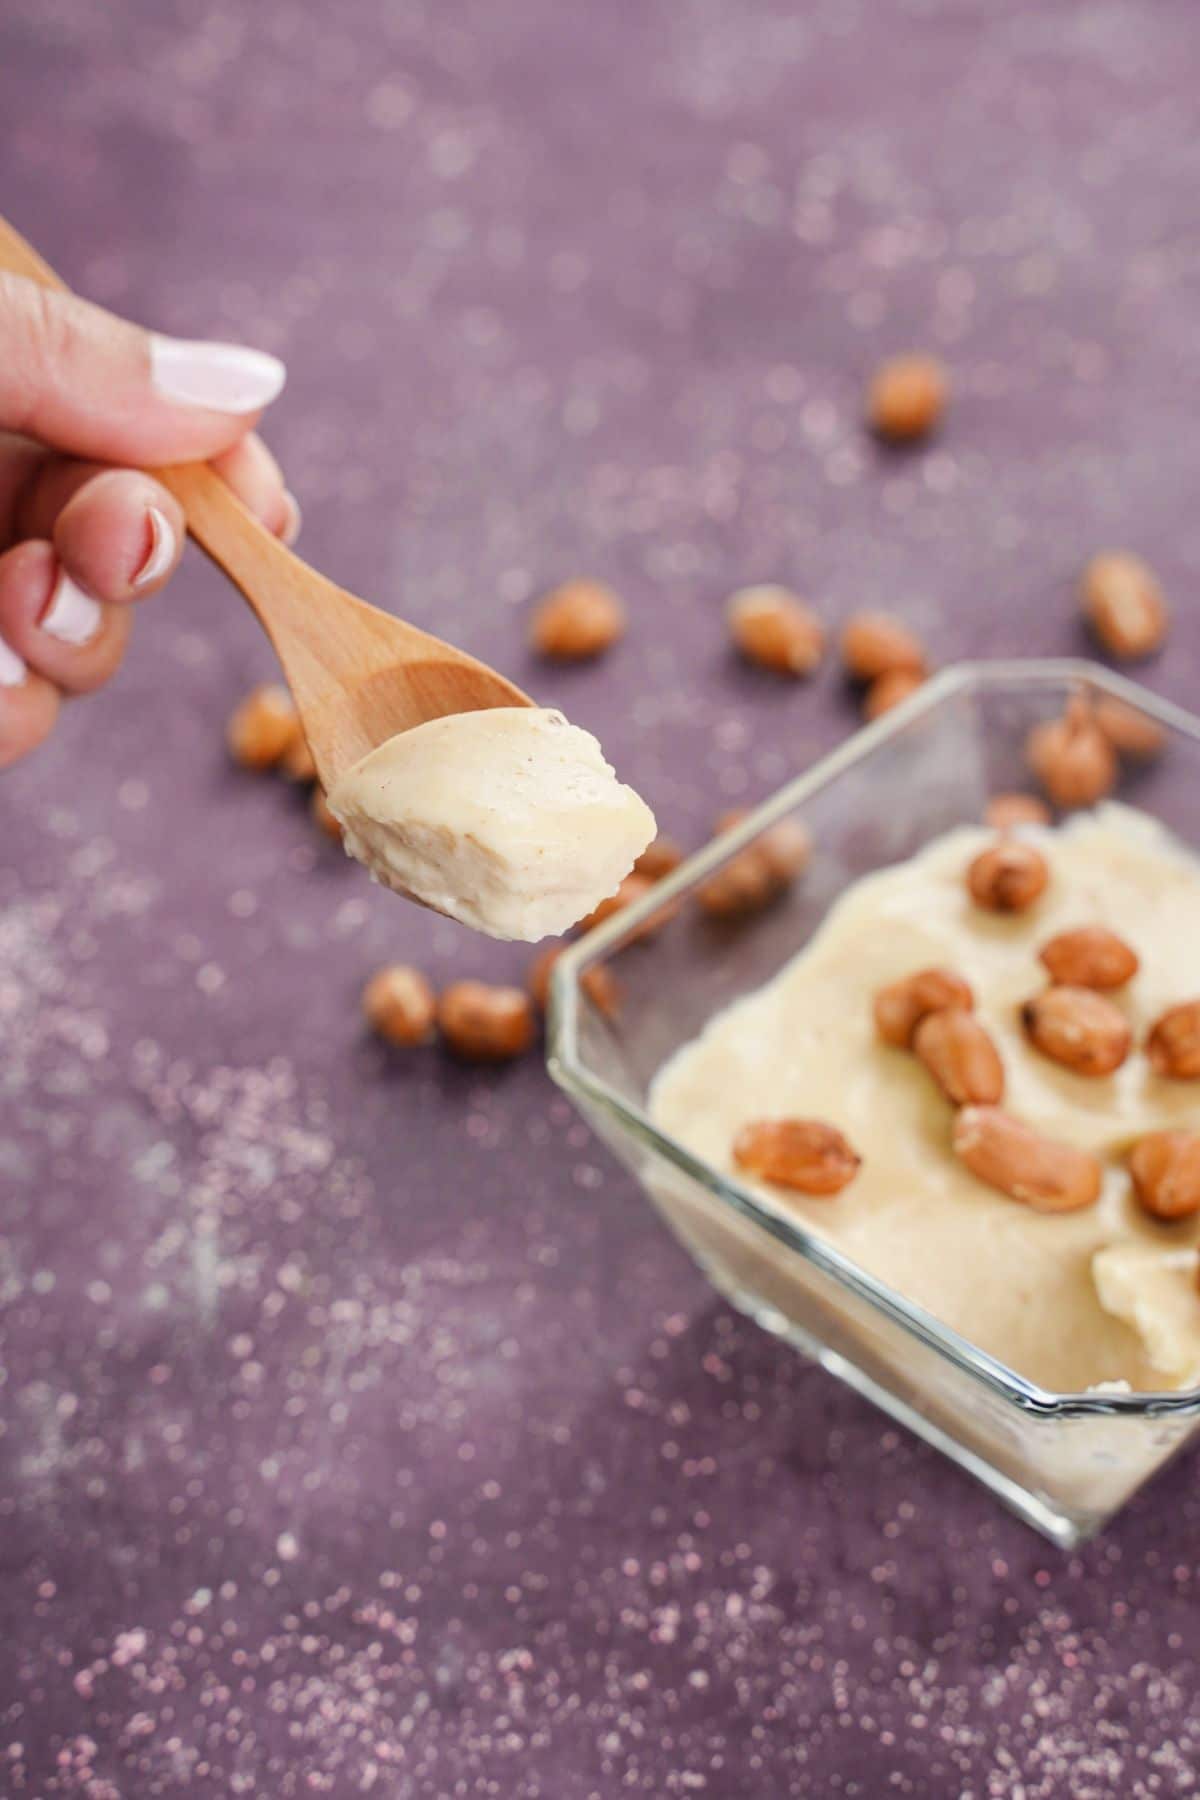 A bite of Creamy Peanut Butter Pudding in a spoon